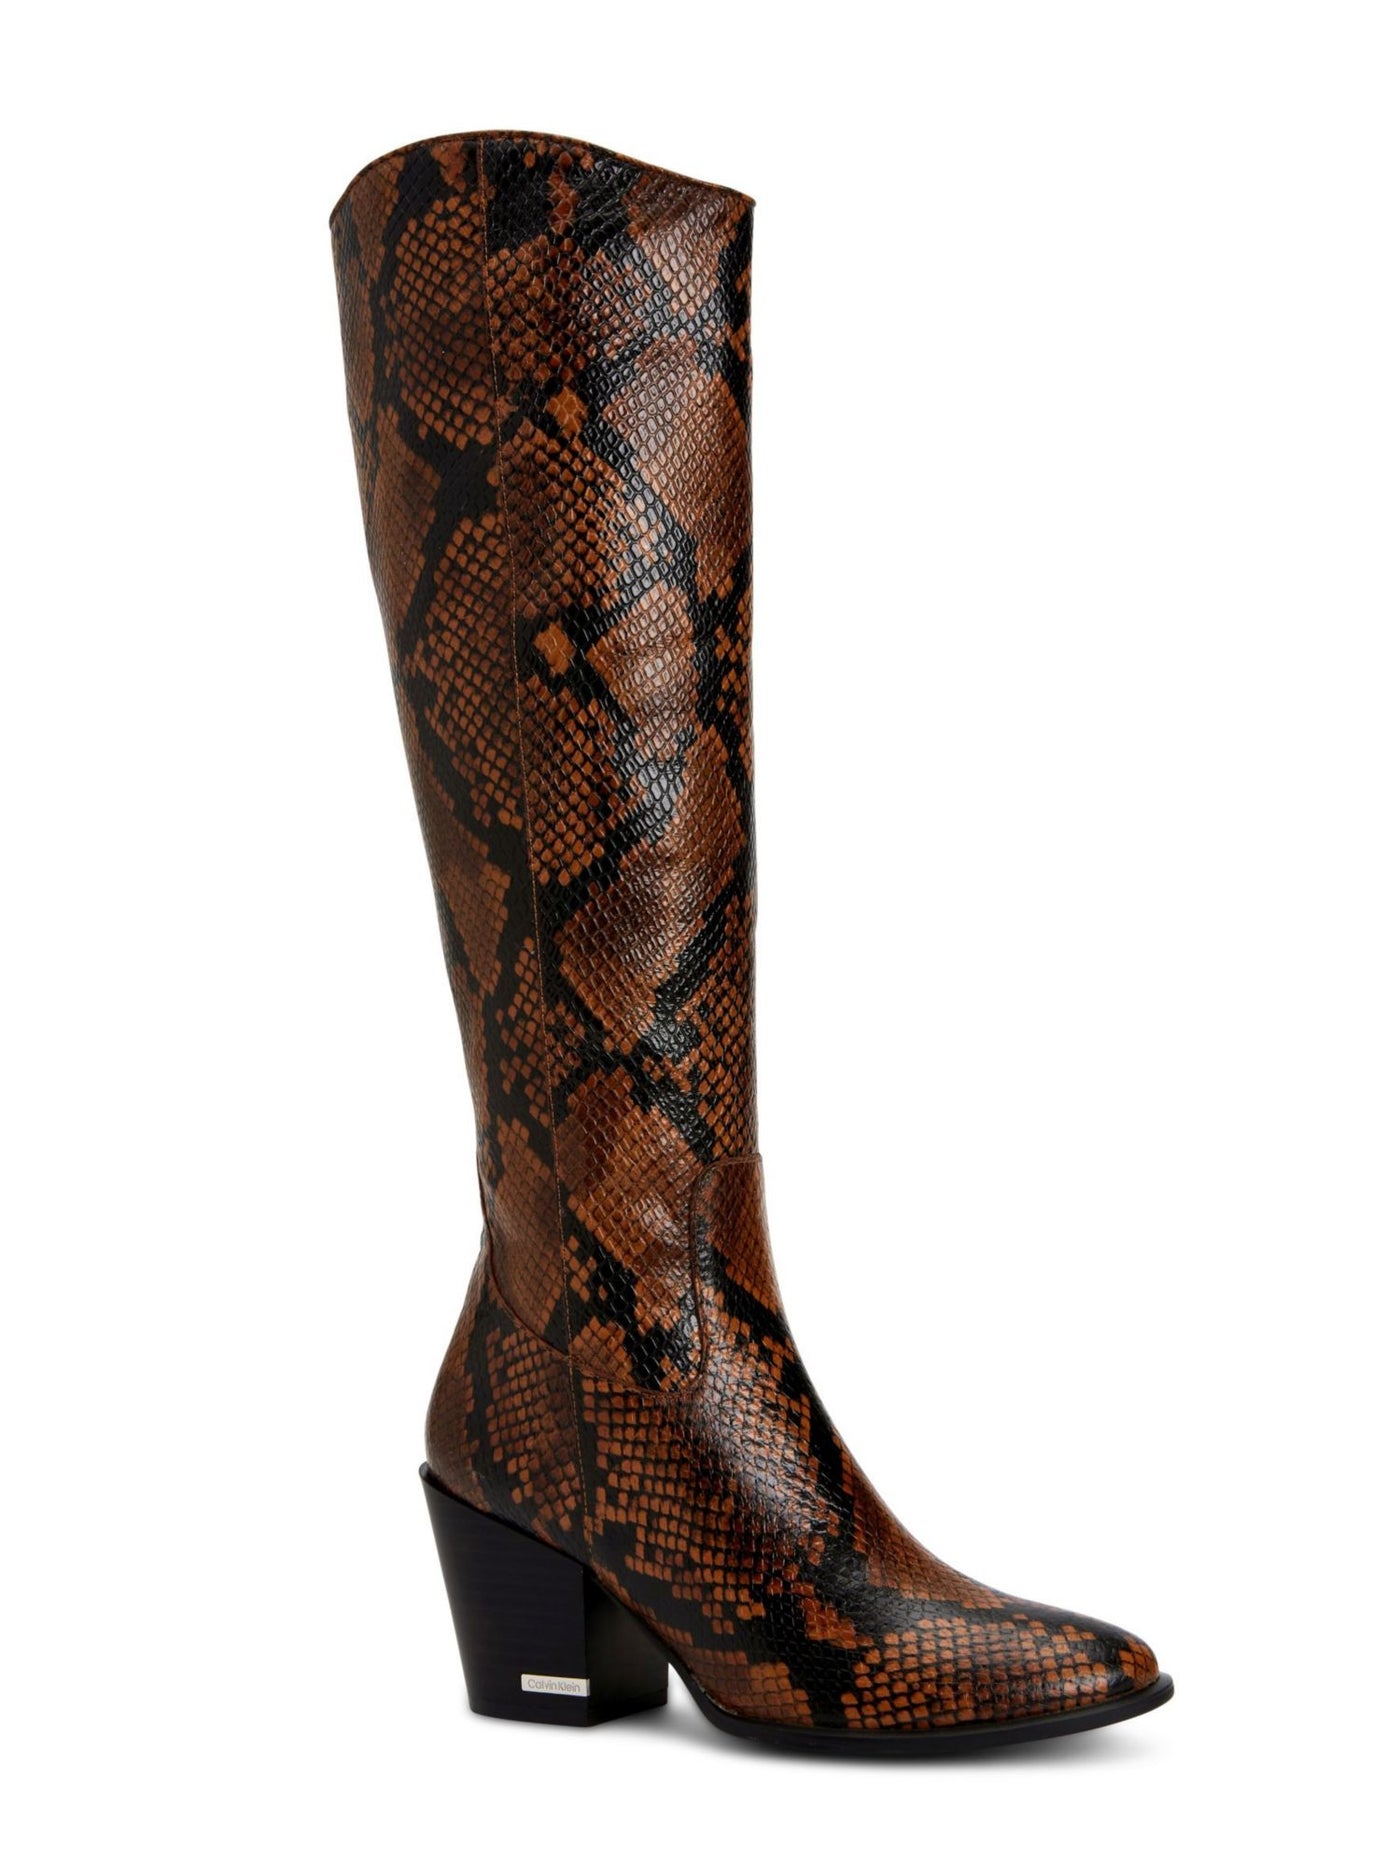 CALVIN KLEIN Womens Brown Animal Print Almond Toe Stacked Heel Zip-Up Leather Heeled Boots 5